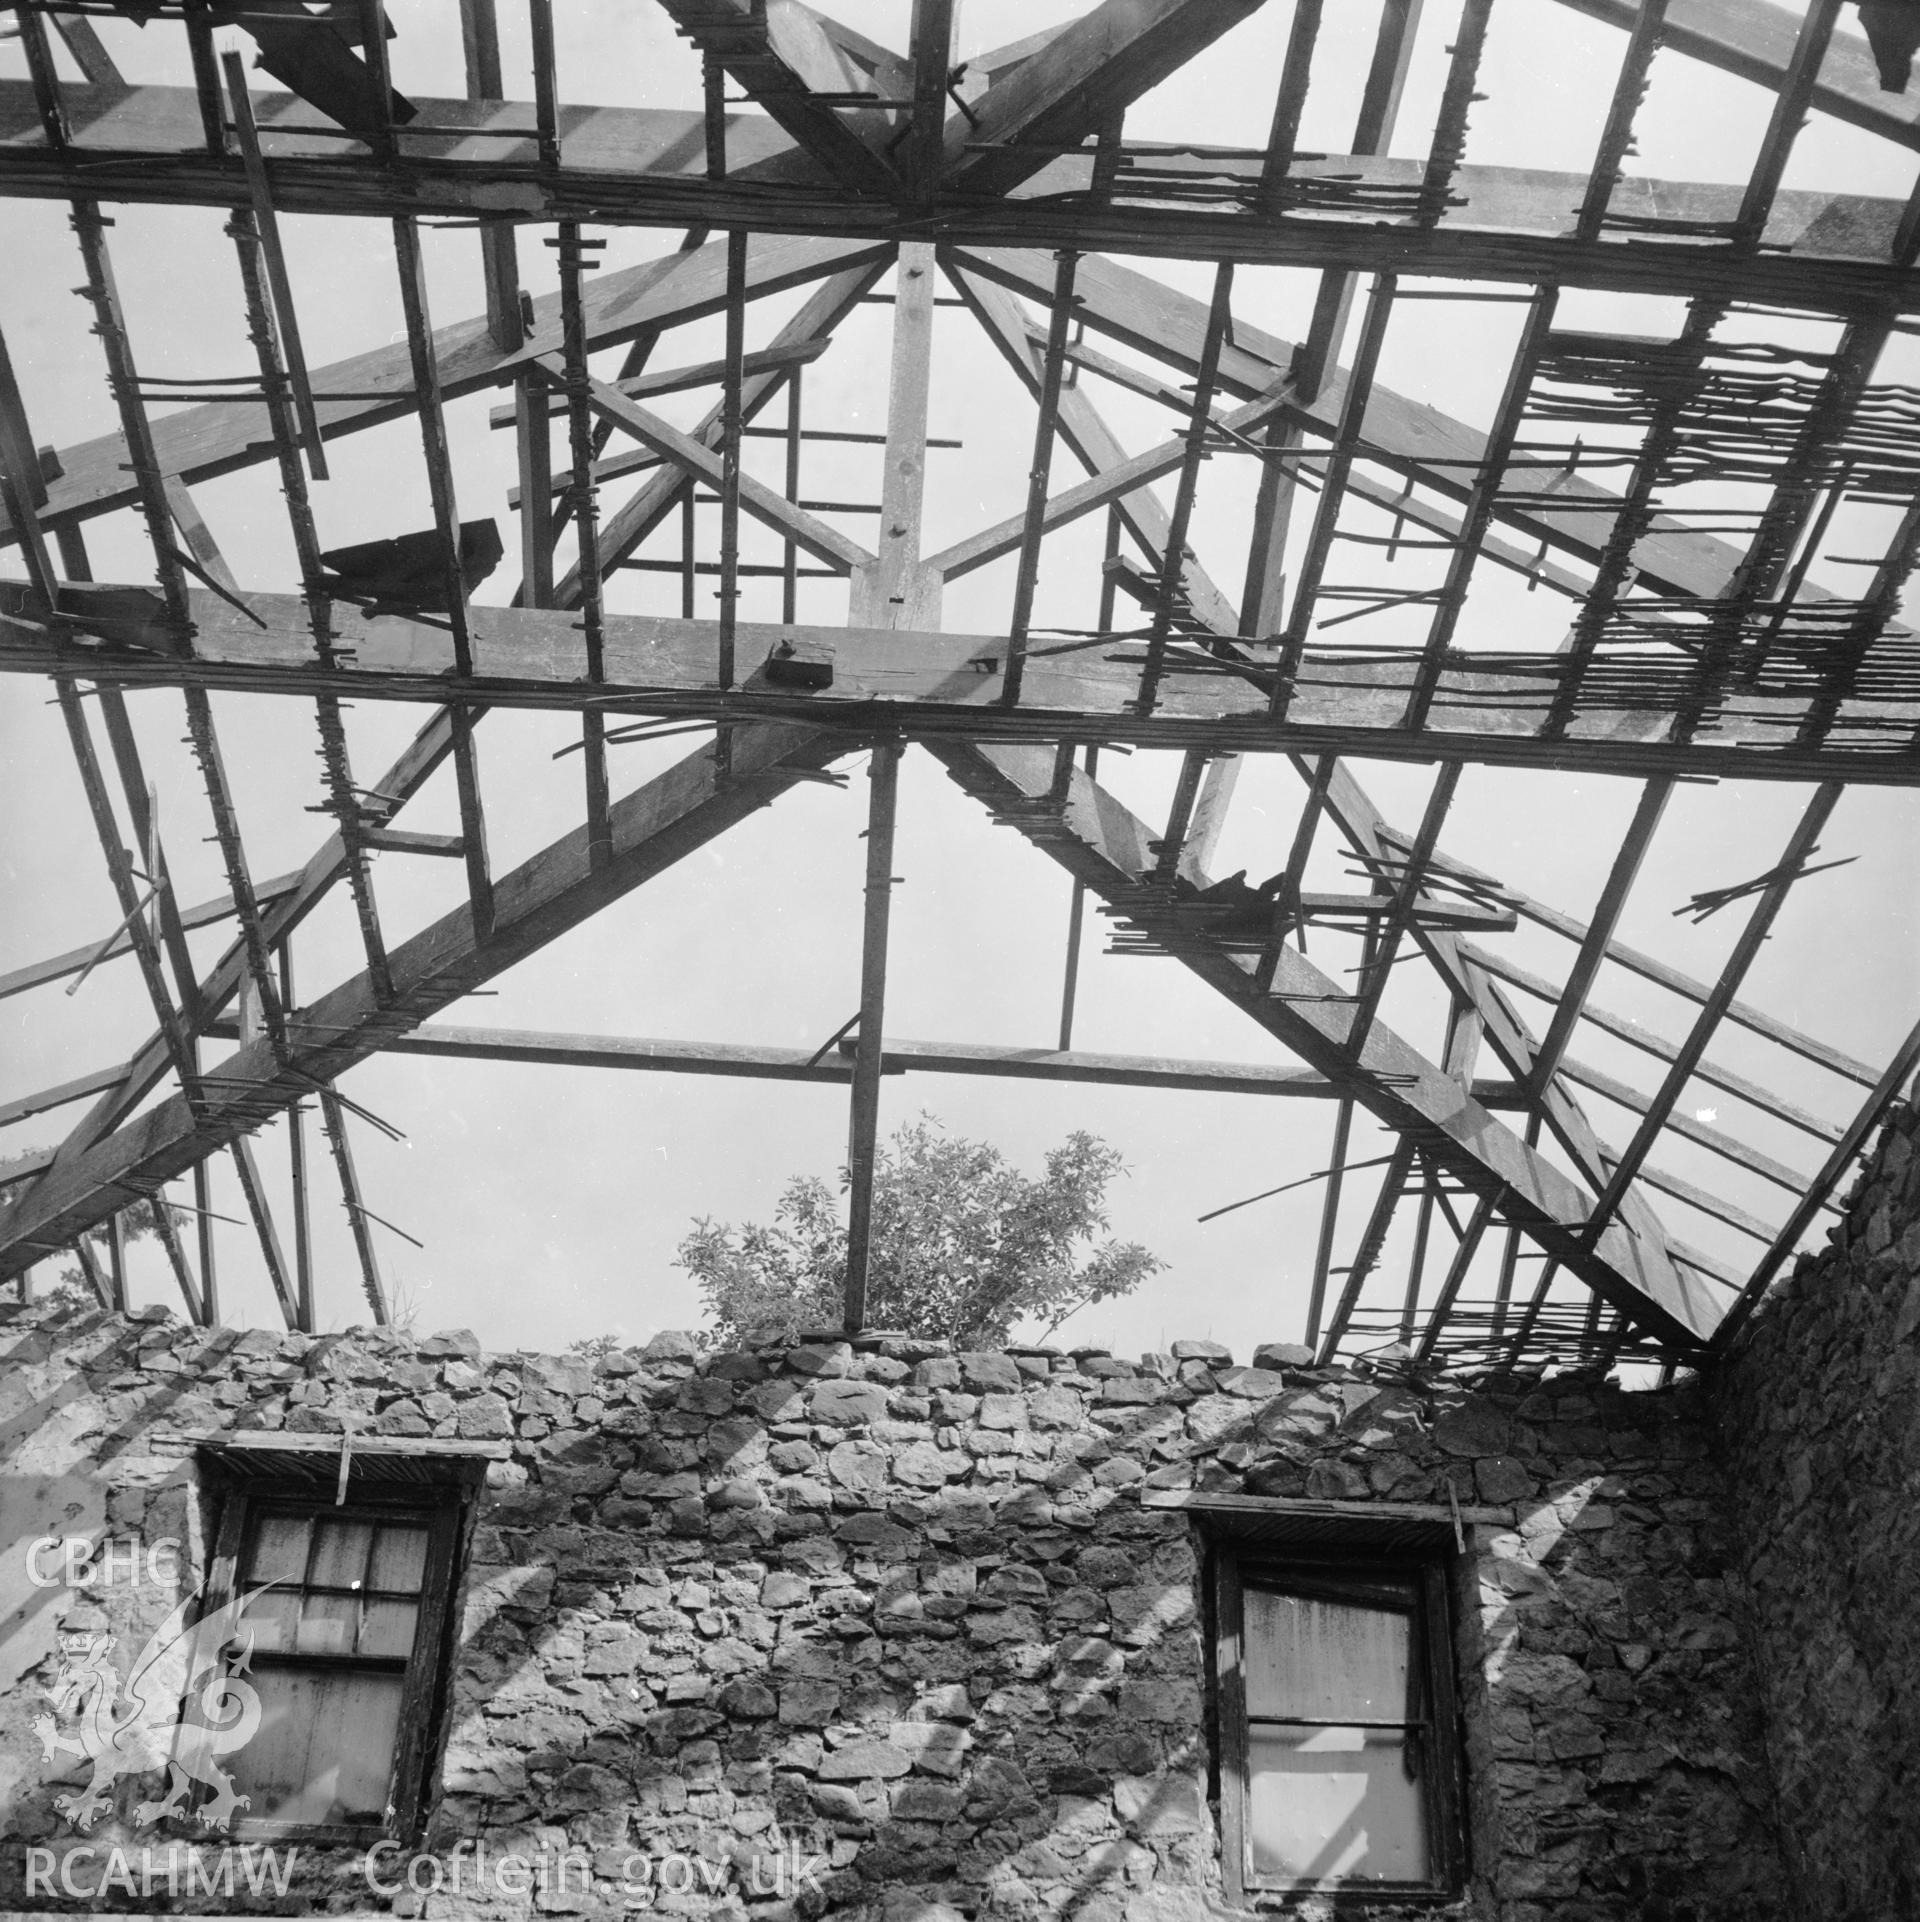 Interior view showing exposed roof.